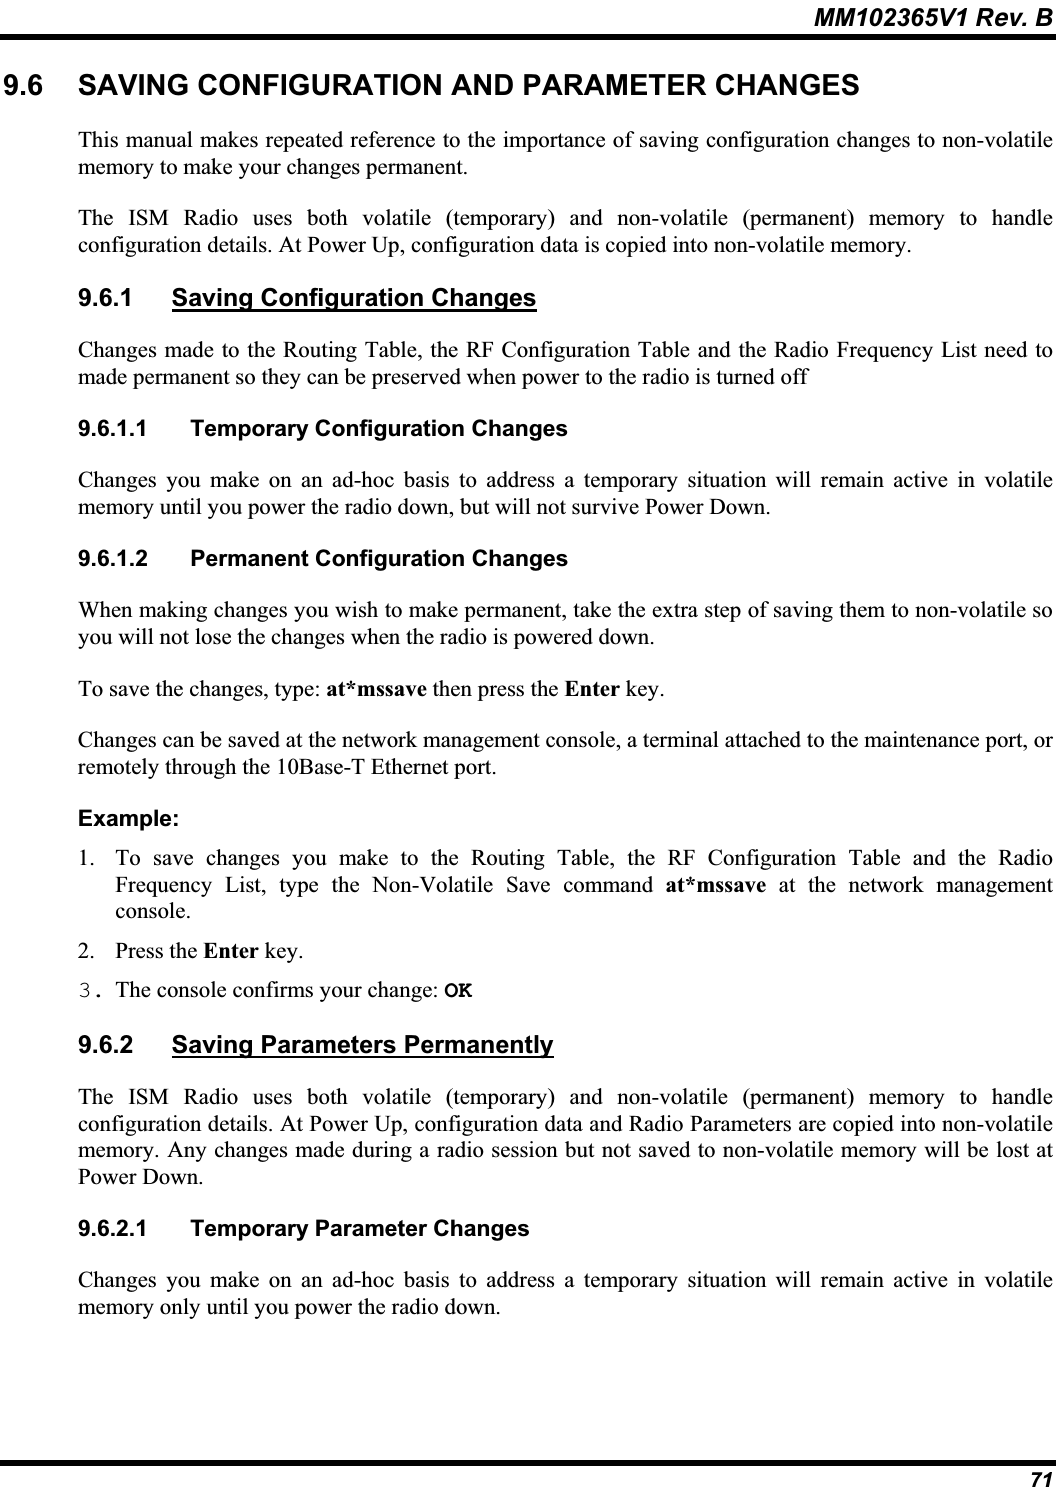 MM102365V1 Rev. B 9.6 SAVING CONFIGURATION AND PARAMETER CHANGES This manual makes repeated reference to the importance of saving configuration changes to non-volatilememory to make your changes permanent.The ISM Radio uses both volatile (temporary) and non-volatile (permanent) memory to handle configuration details. At Power Up, configuration data is copied into non-volatile memory.9.6.1 Saving Configuration ChangesChanges made to the Routing Table, the RF Configuration Table and the Radio Frequency List need to made permanent so they can be preserved when power to the radio is turned off 9.6.1.1 Temporary Configuration Changes Changes you make on an ad-hoc basis to address a temporary situation will remain active in volatile memory until you power the radio down, but will not survive Power Down. 9.6.1.2 Permanent Configuration Changes When making changes you wish to make permanent, take the extra step of saving them to non-volatile soyou will not lose the changes when the radio is powered down. To save the changes, type: at*mssave then press the Enter key.Changes can be saved at the network management console, a terminal attached to the maintenance port, or remotely through the 10Base-T Ethernet port.Example:1. To save changes you make to the Routing Table, the RF Configuration Table and the RadioFrequency List, type the Non-Volatile Save command at*mssave at the network managementconsole.2. Press the Enter key.3. The console confirms your change: OK9.6.2 Saving Parameters PermanentlyThe ISM Radio uses both volatile (temporary) and non-volatile (permanent) memory to handle configuration details. At Power Up, configuration data and Radio Parameters are copied into non-volatile memory. Any changes made during a radio session but not saved to non-volatile memory will be lost atPower Down. 9.6.2.1 Temporary Parameter Changes Changes you make on an ad-hoc basis to address a temporary situation will remain active in volatile memory only until you power the radio down. 71